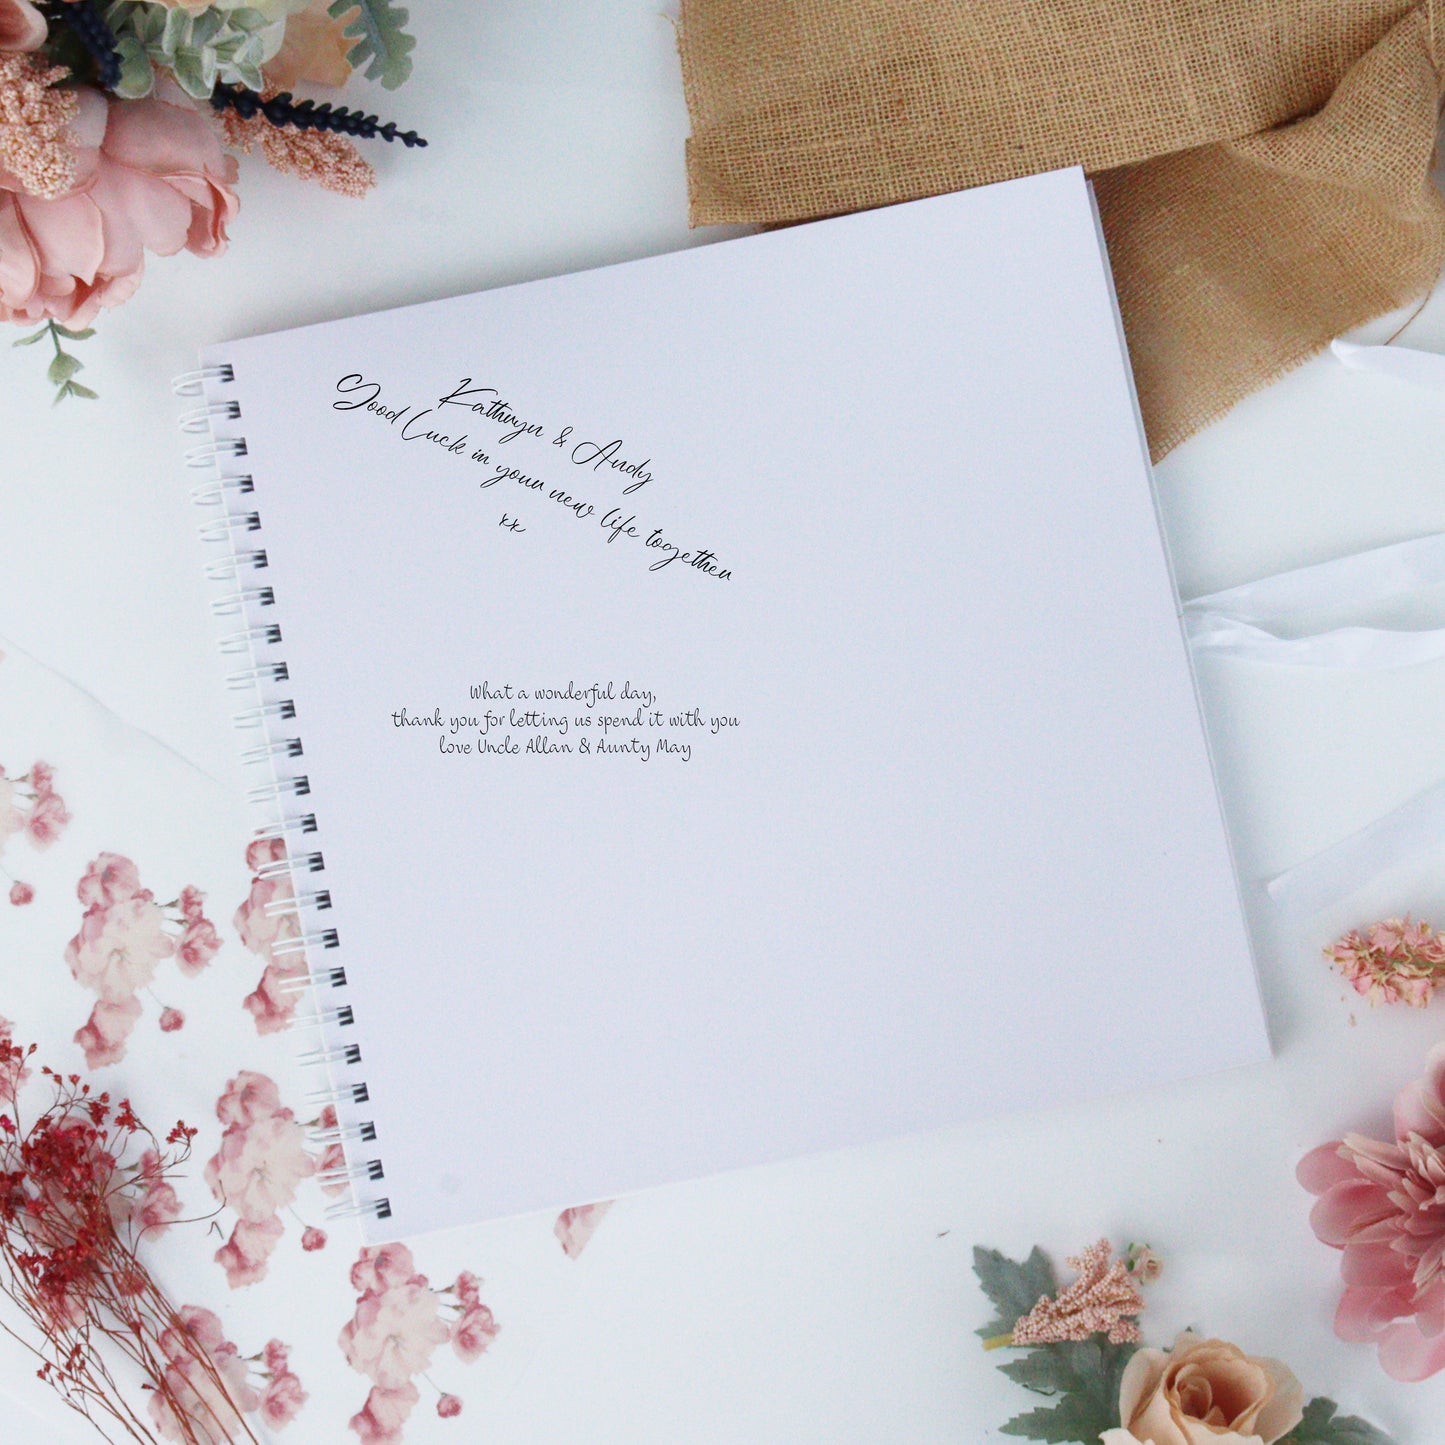 Personalised Sunflower Wedding Guest Book